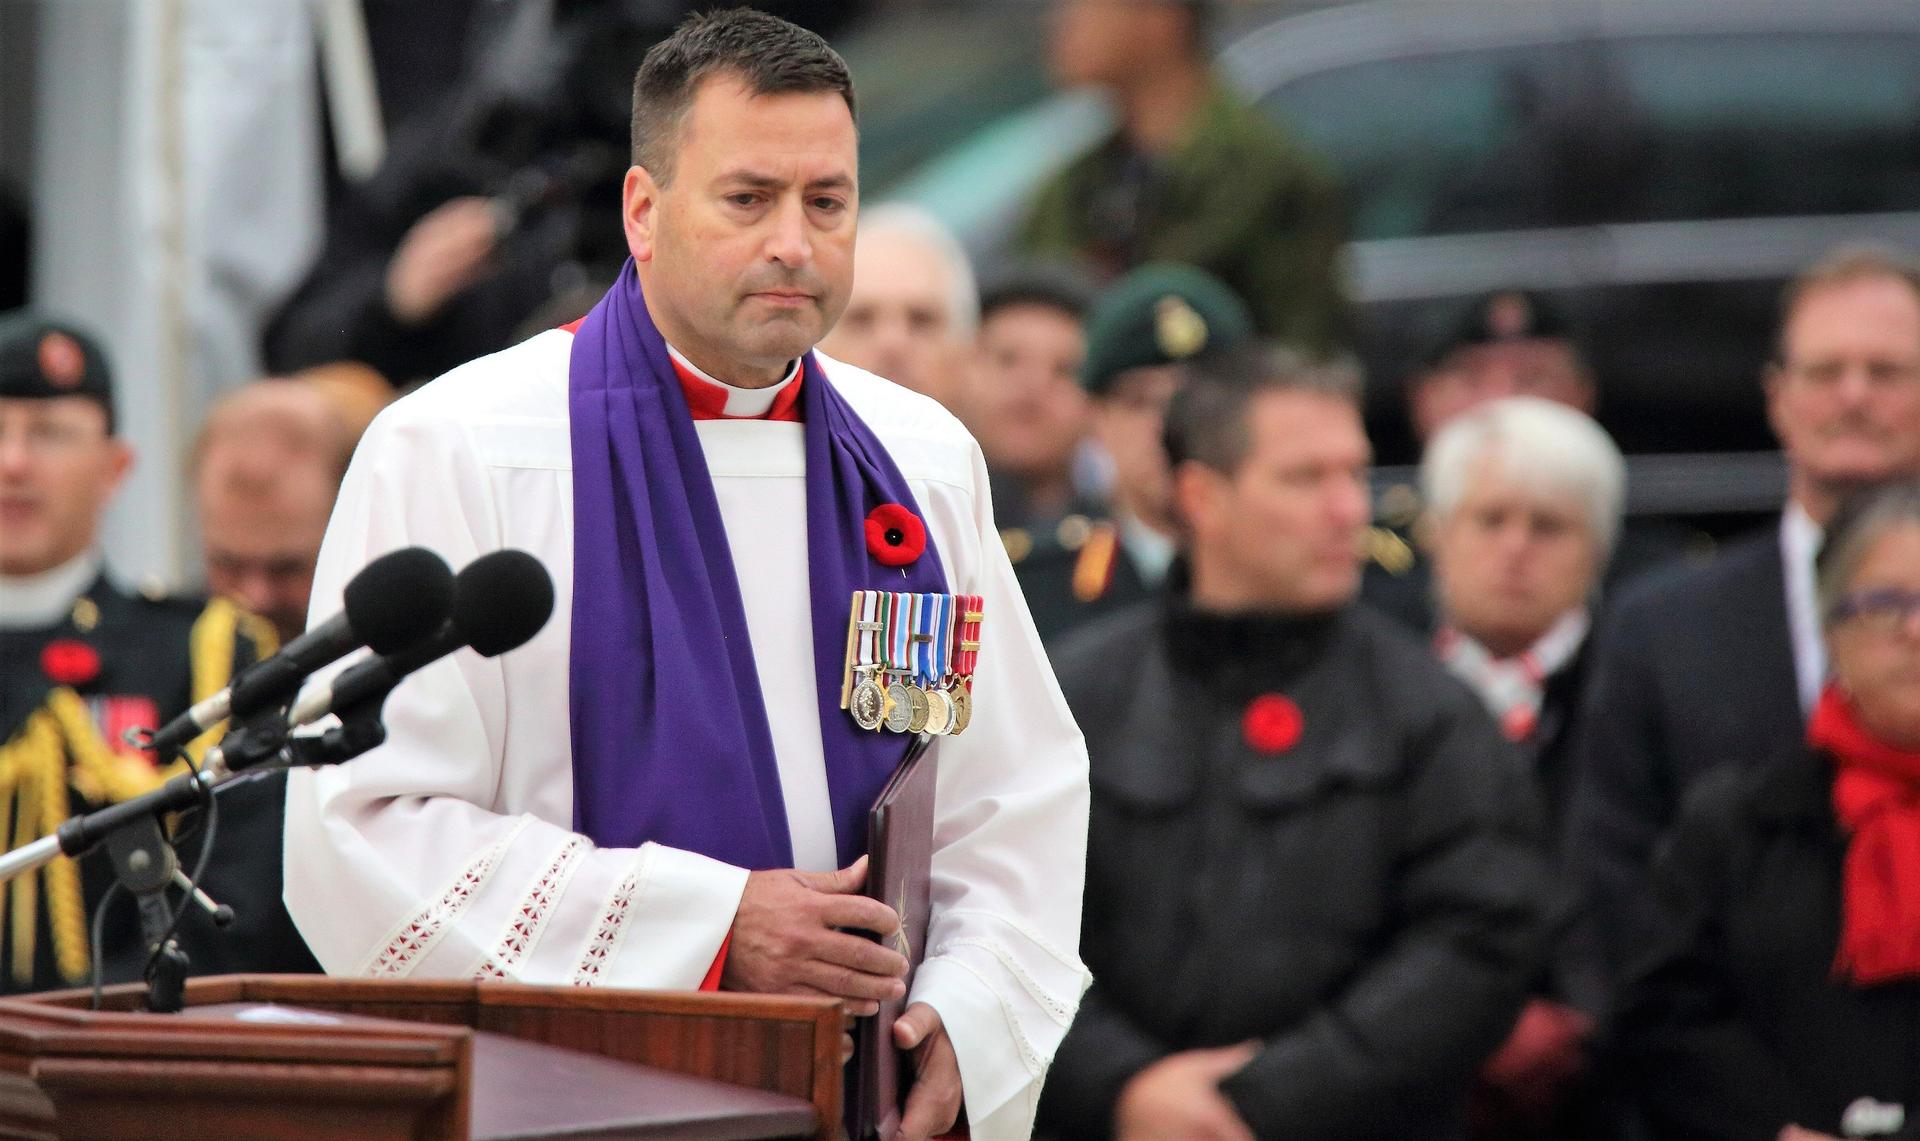 Canadian panel urges not hiring military chaplains of certain religions